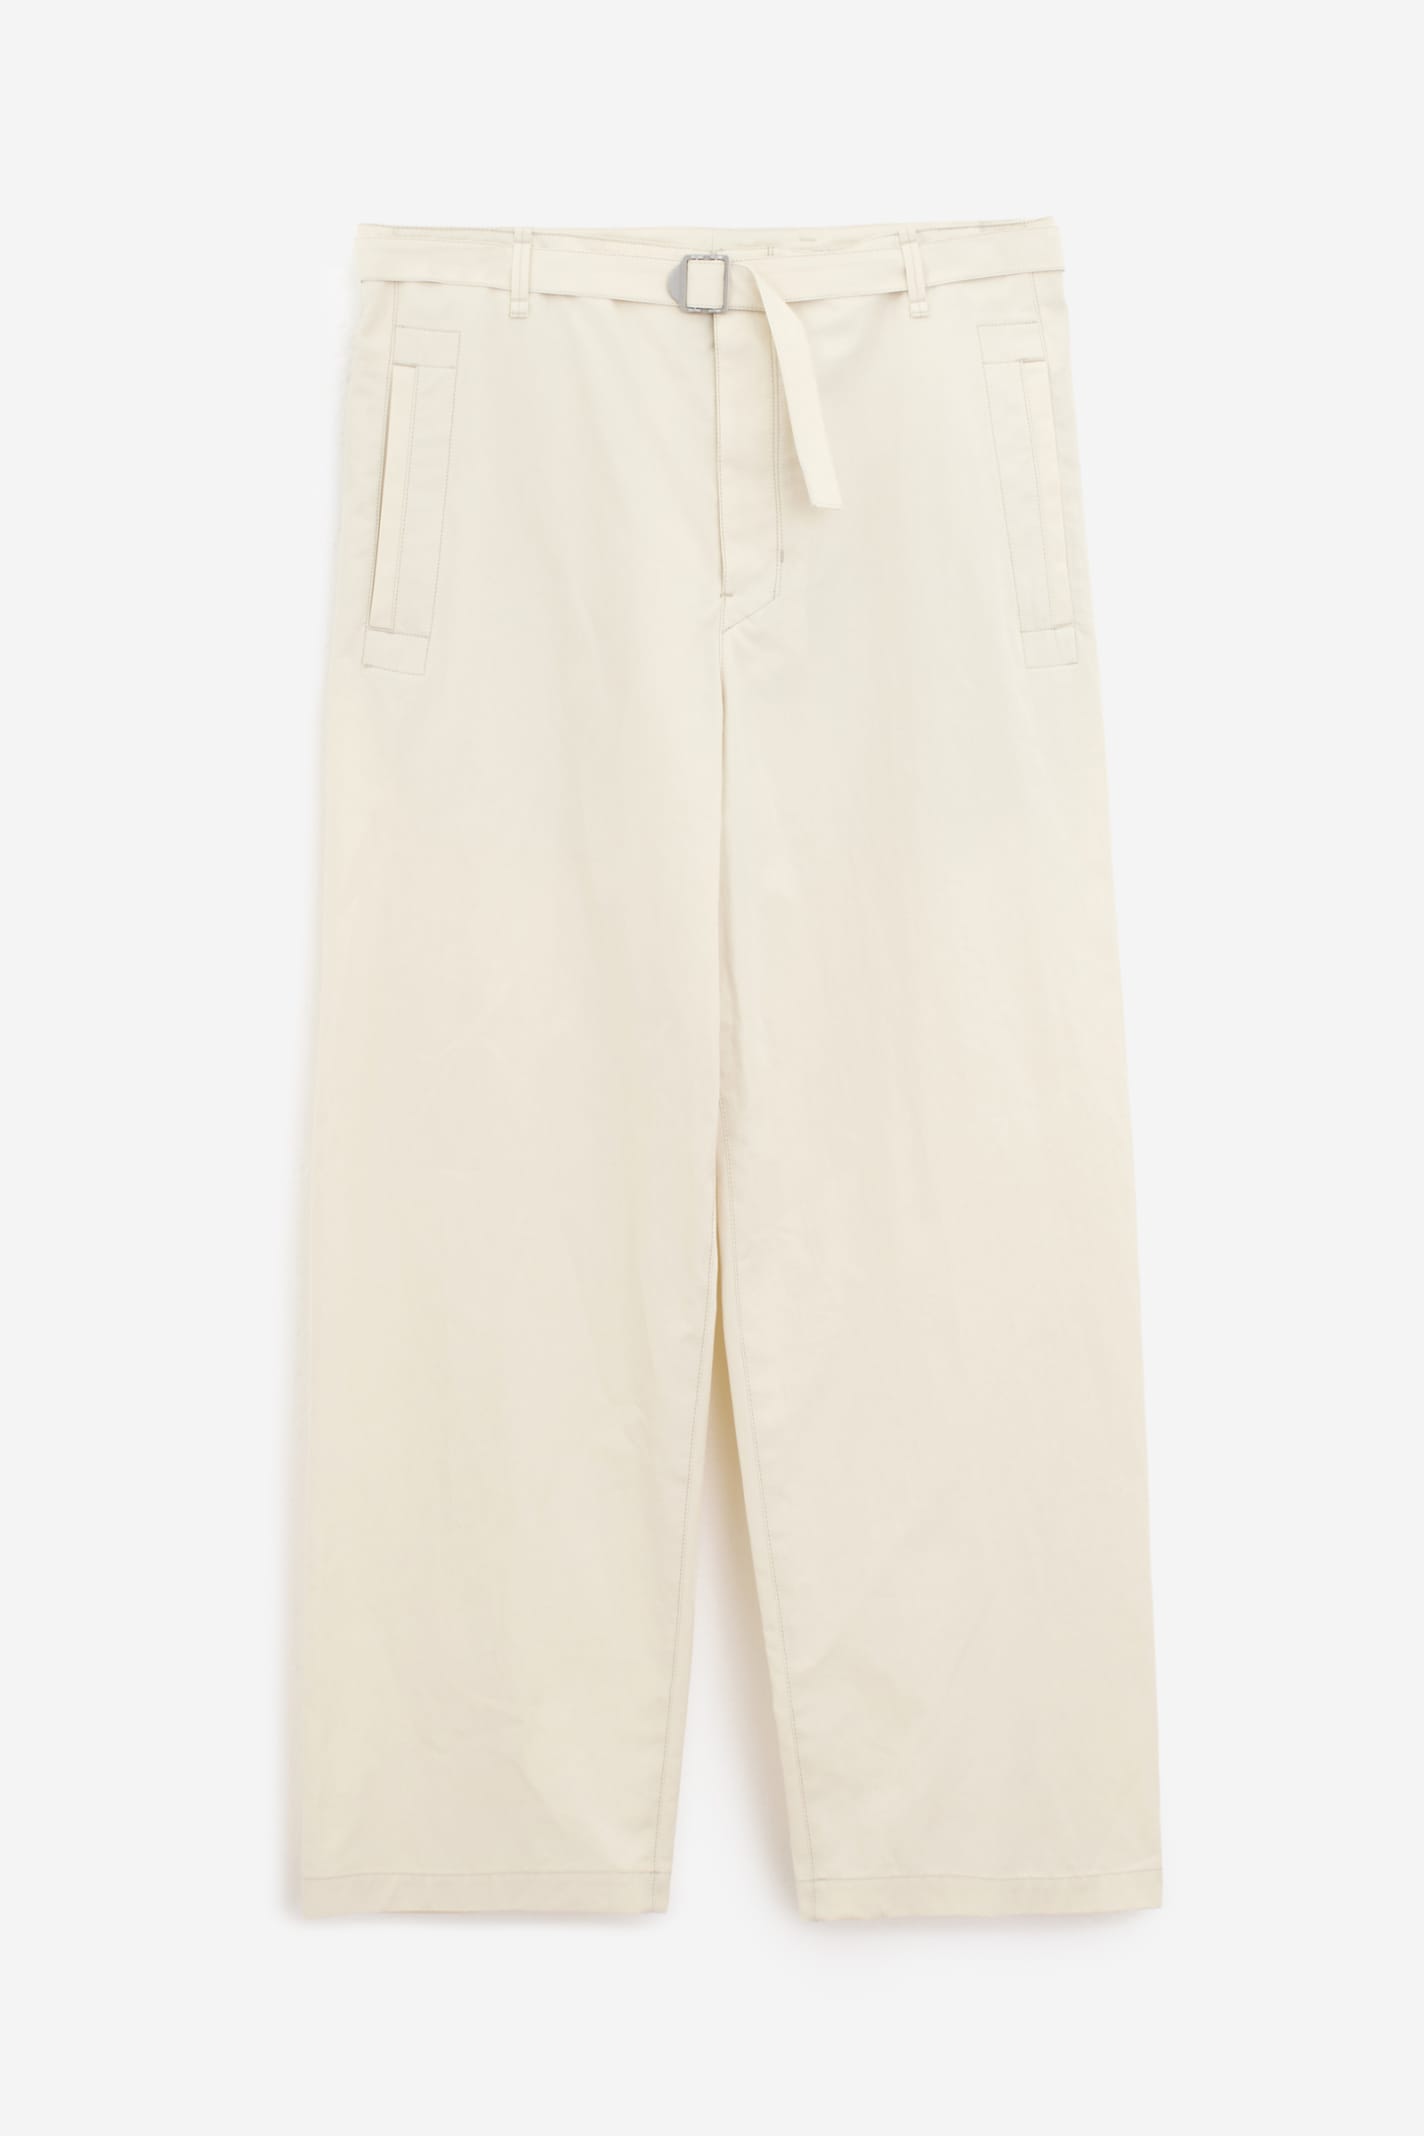 Lemaire Seamless Belted Pants In Neutral